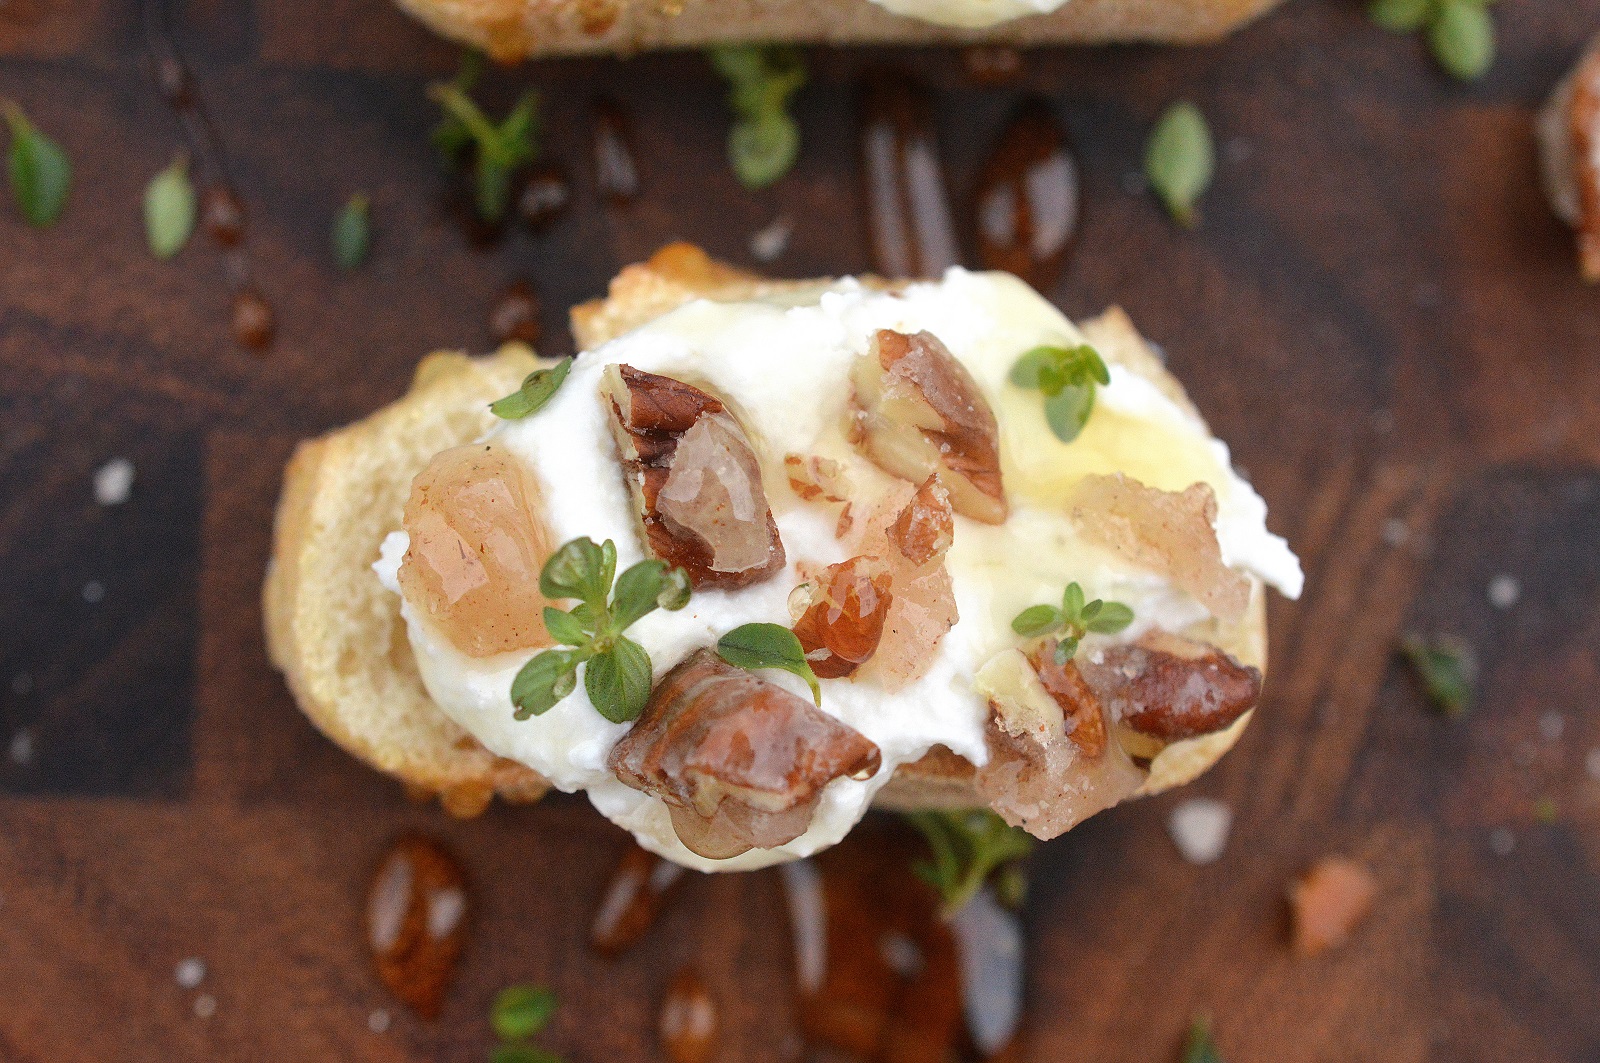 Whipped Ricotta on Crostini with Candied Nuts